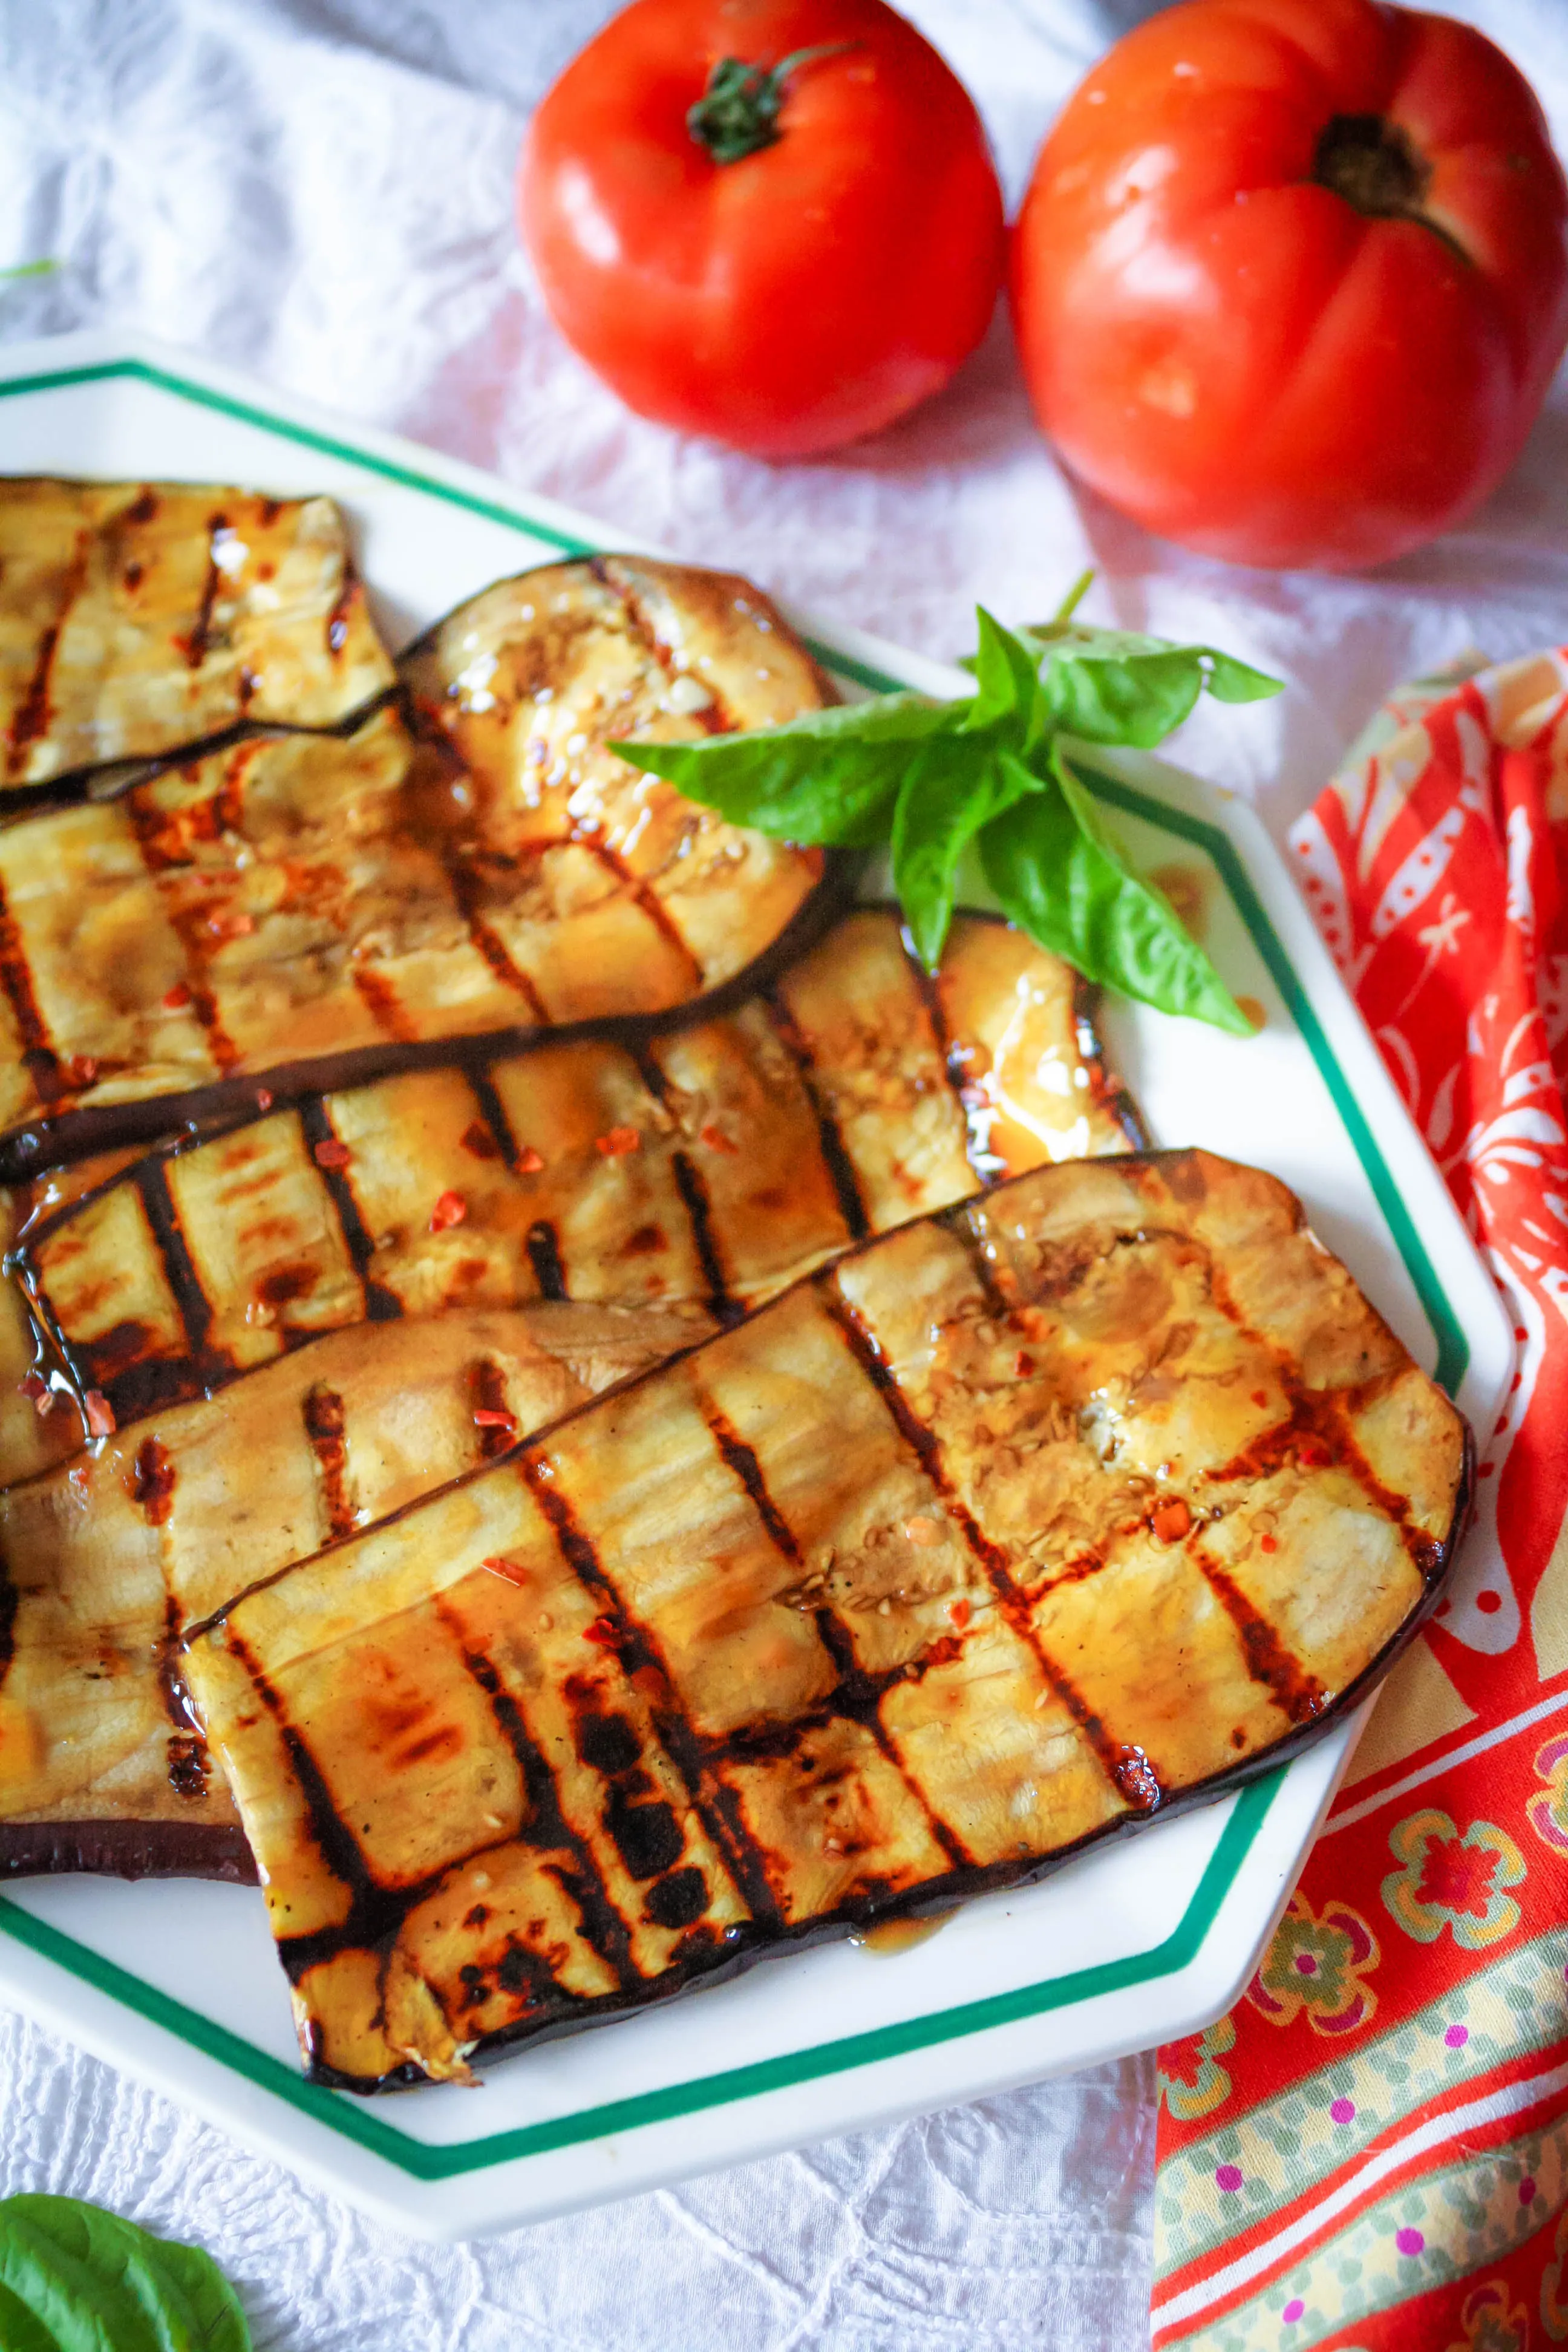 Grilled Eggplant with Teriyaki is a flavorful side dish or main dish! Grilled Eggplant with Teriyaki is a fabulous grilling option.